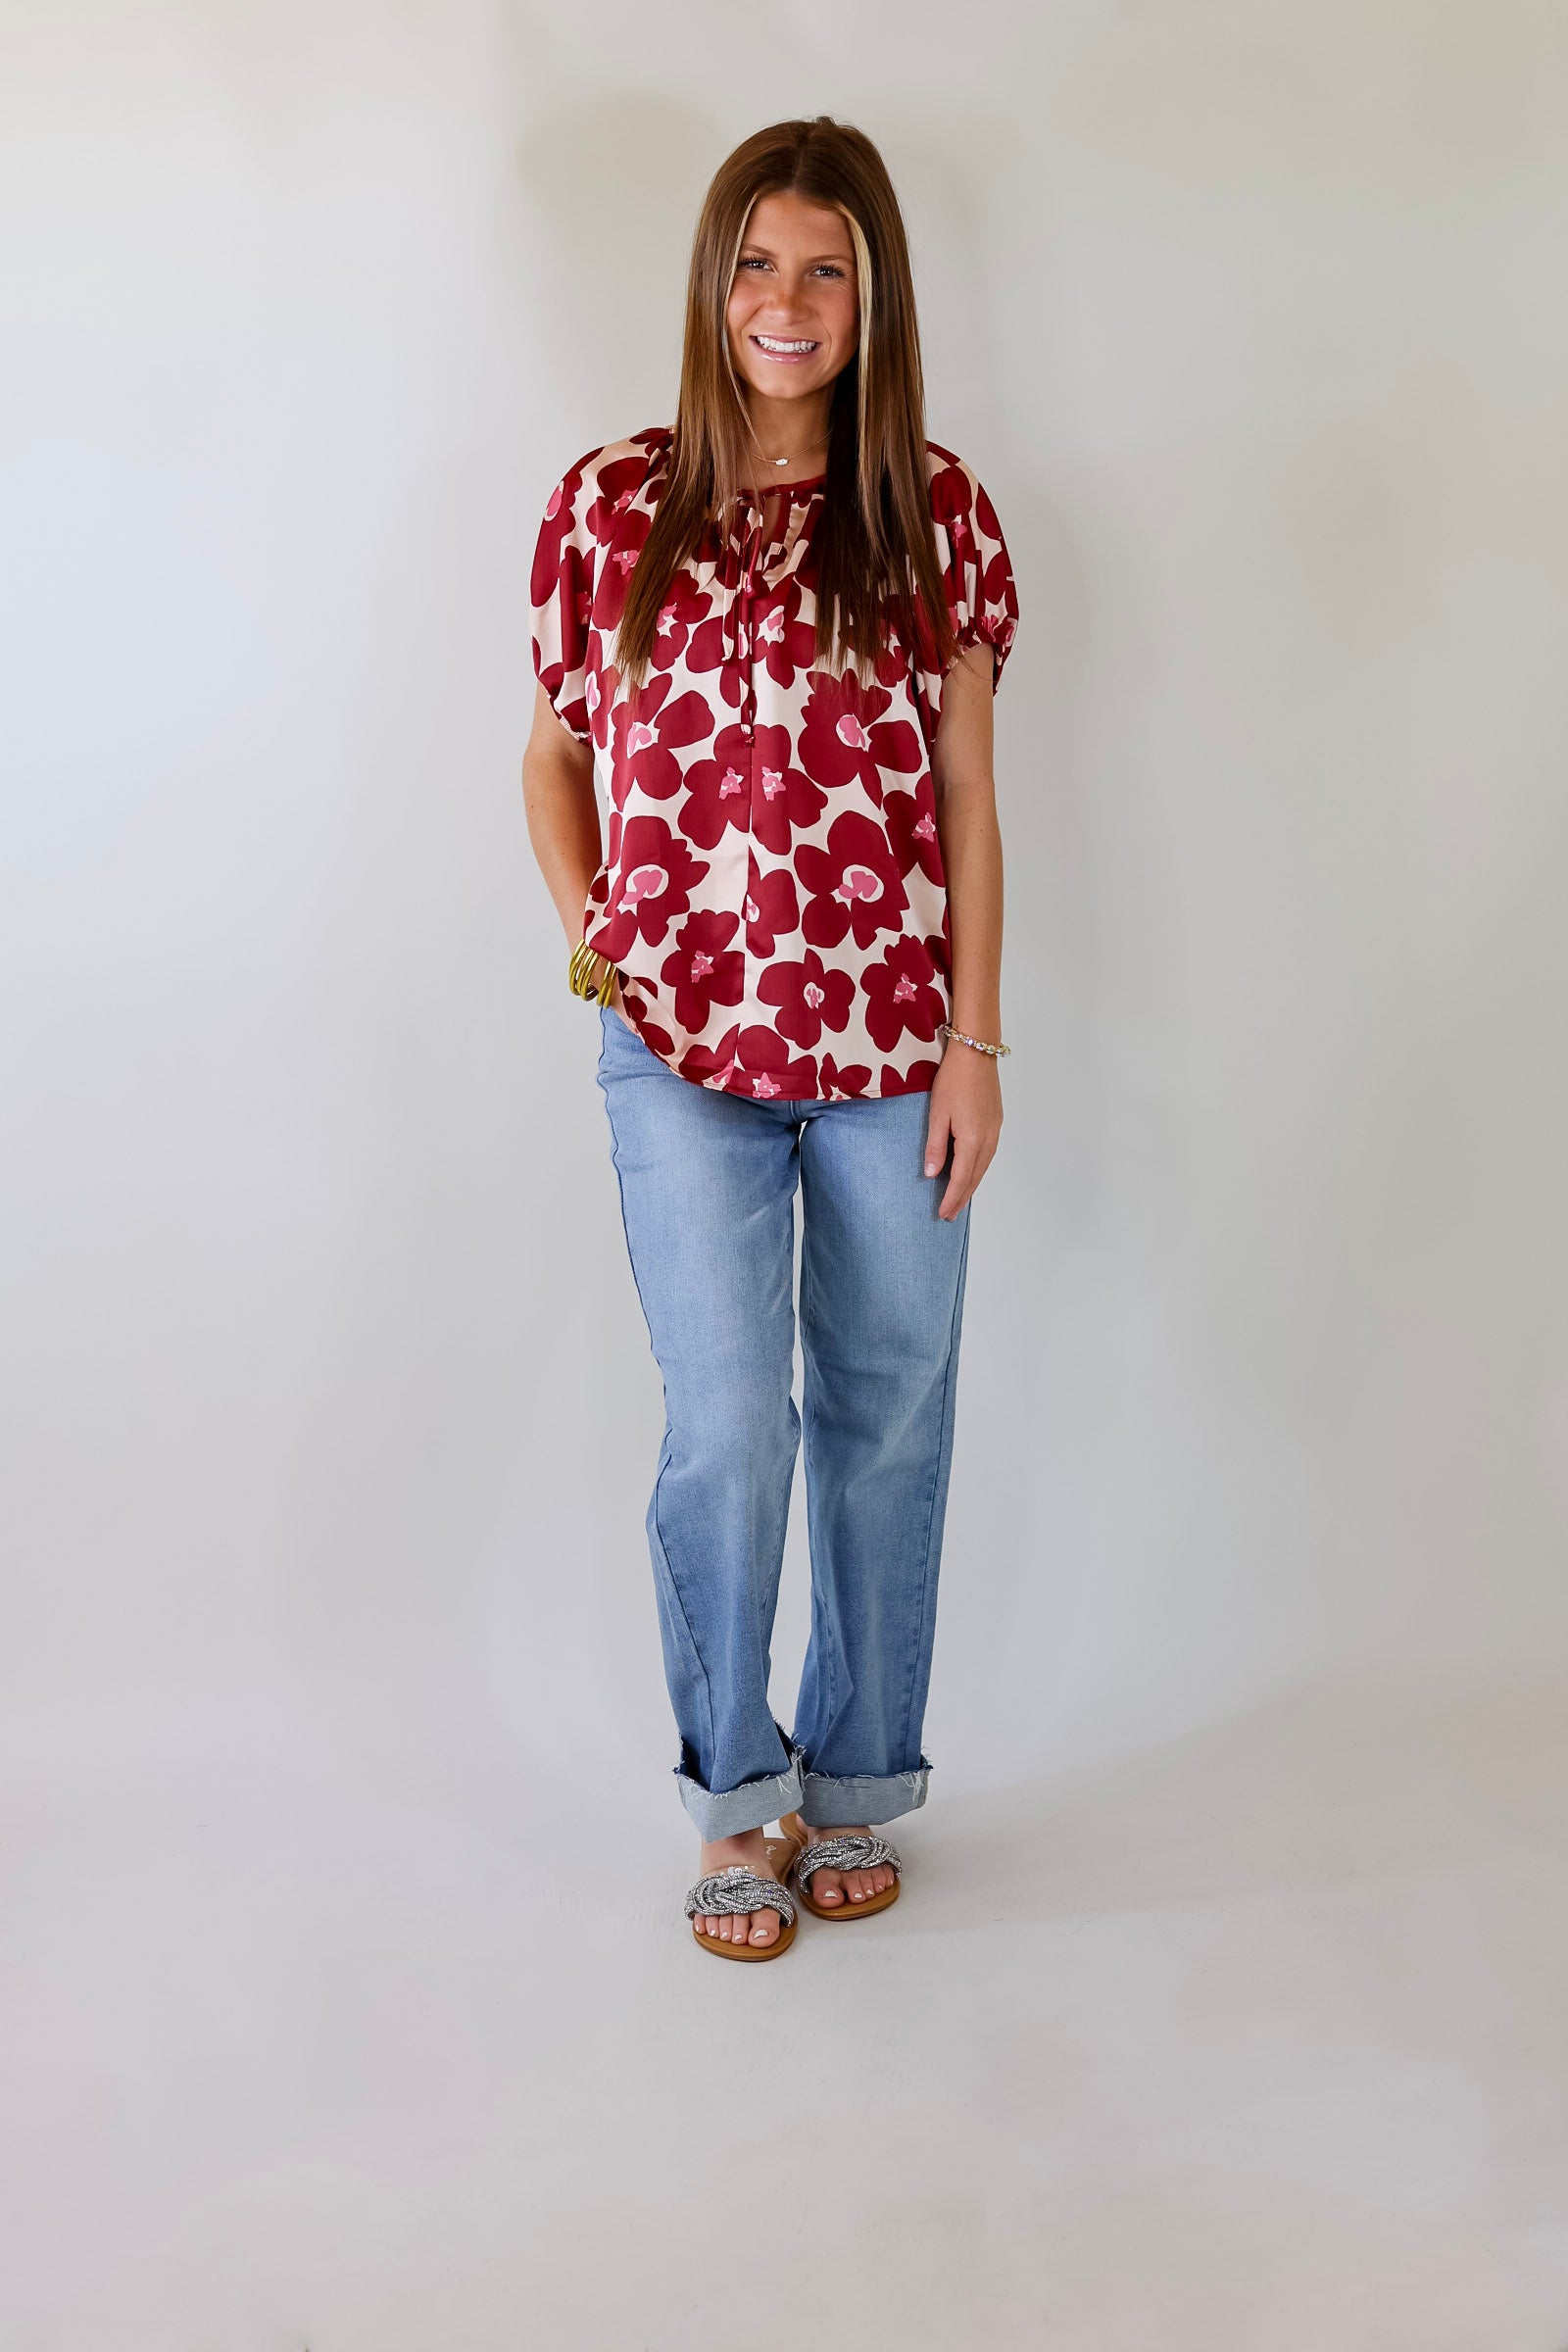 Counting Kisses Short Sleeve Floral Top with Keyhole in Maroon - Giddy Up Glamour Boutique